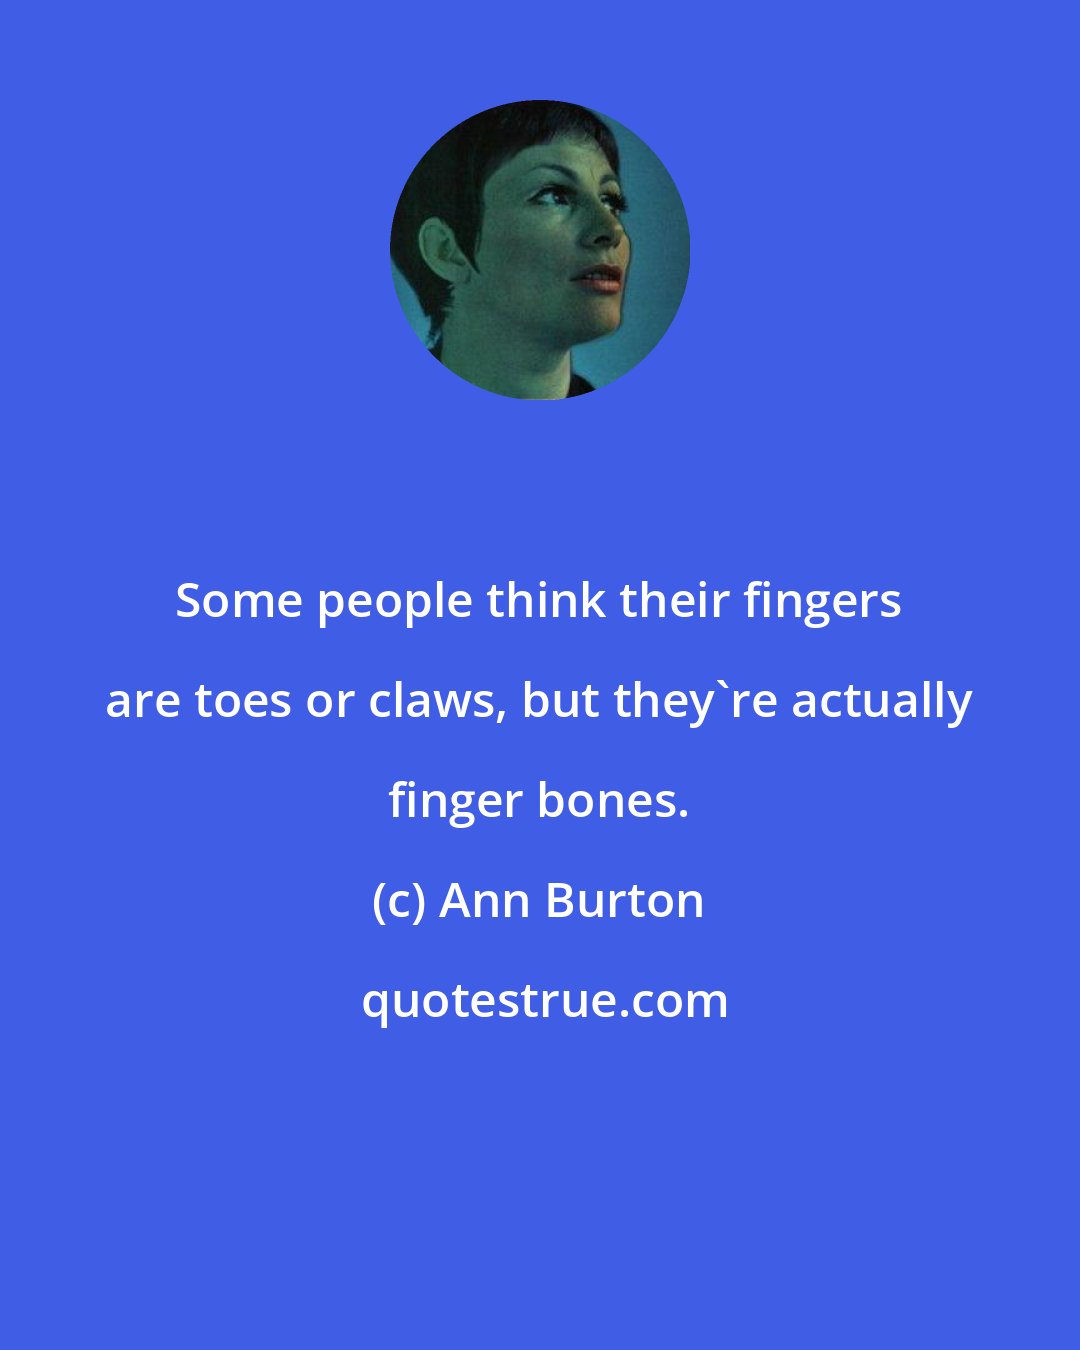 Ann Burton: Some people think their fingers are toes or claws, but they're actually finger bones.